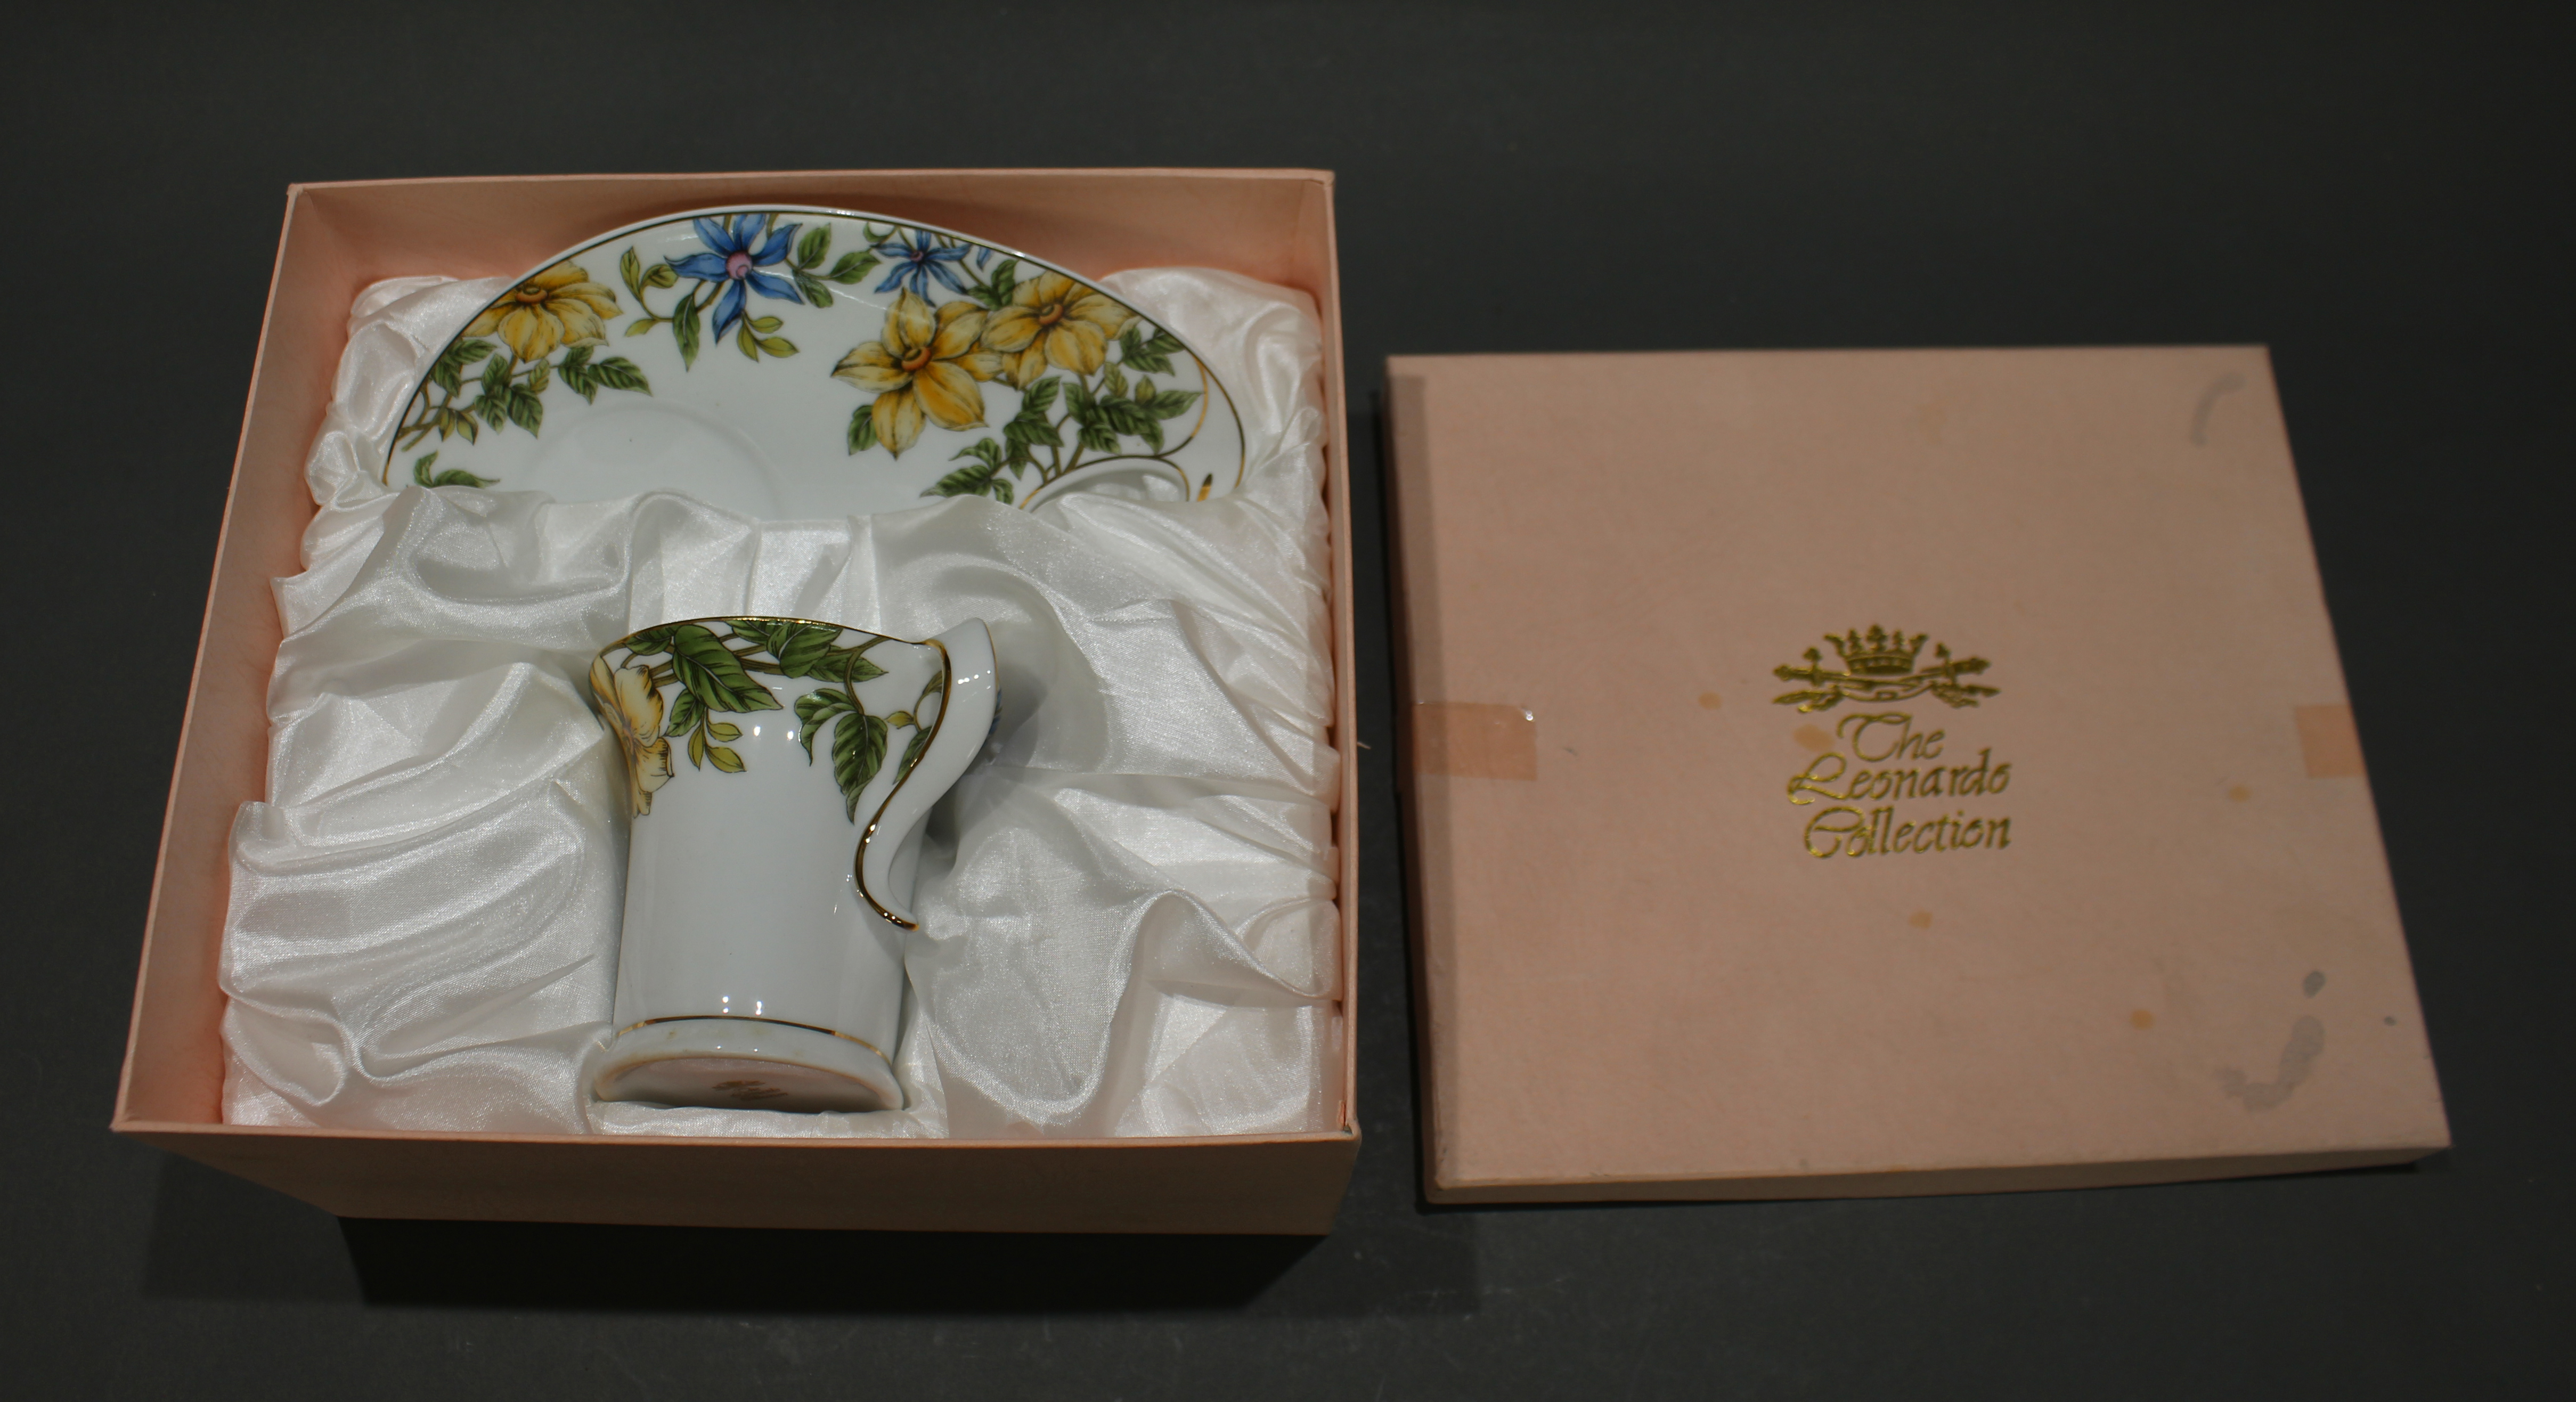 Boxed Leonardo Collection Porcelain Cup & Saucer - Image 3 of 3